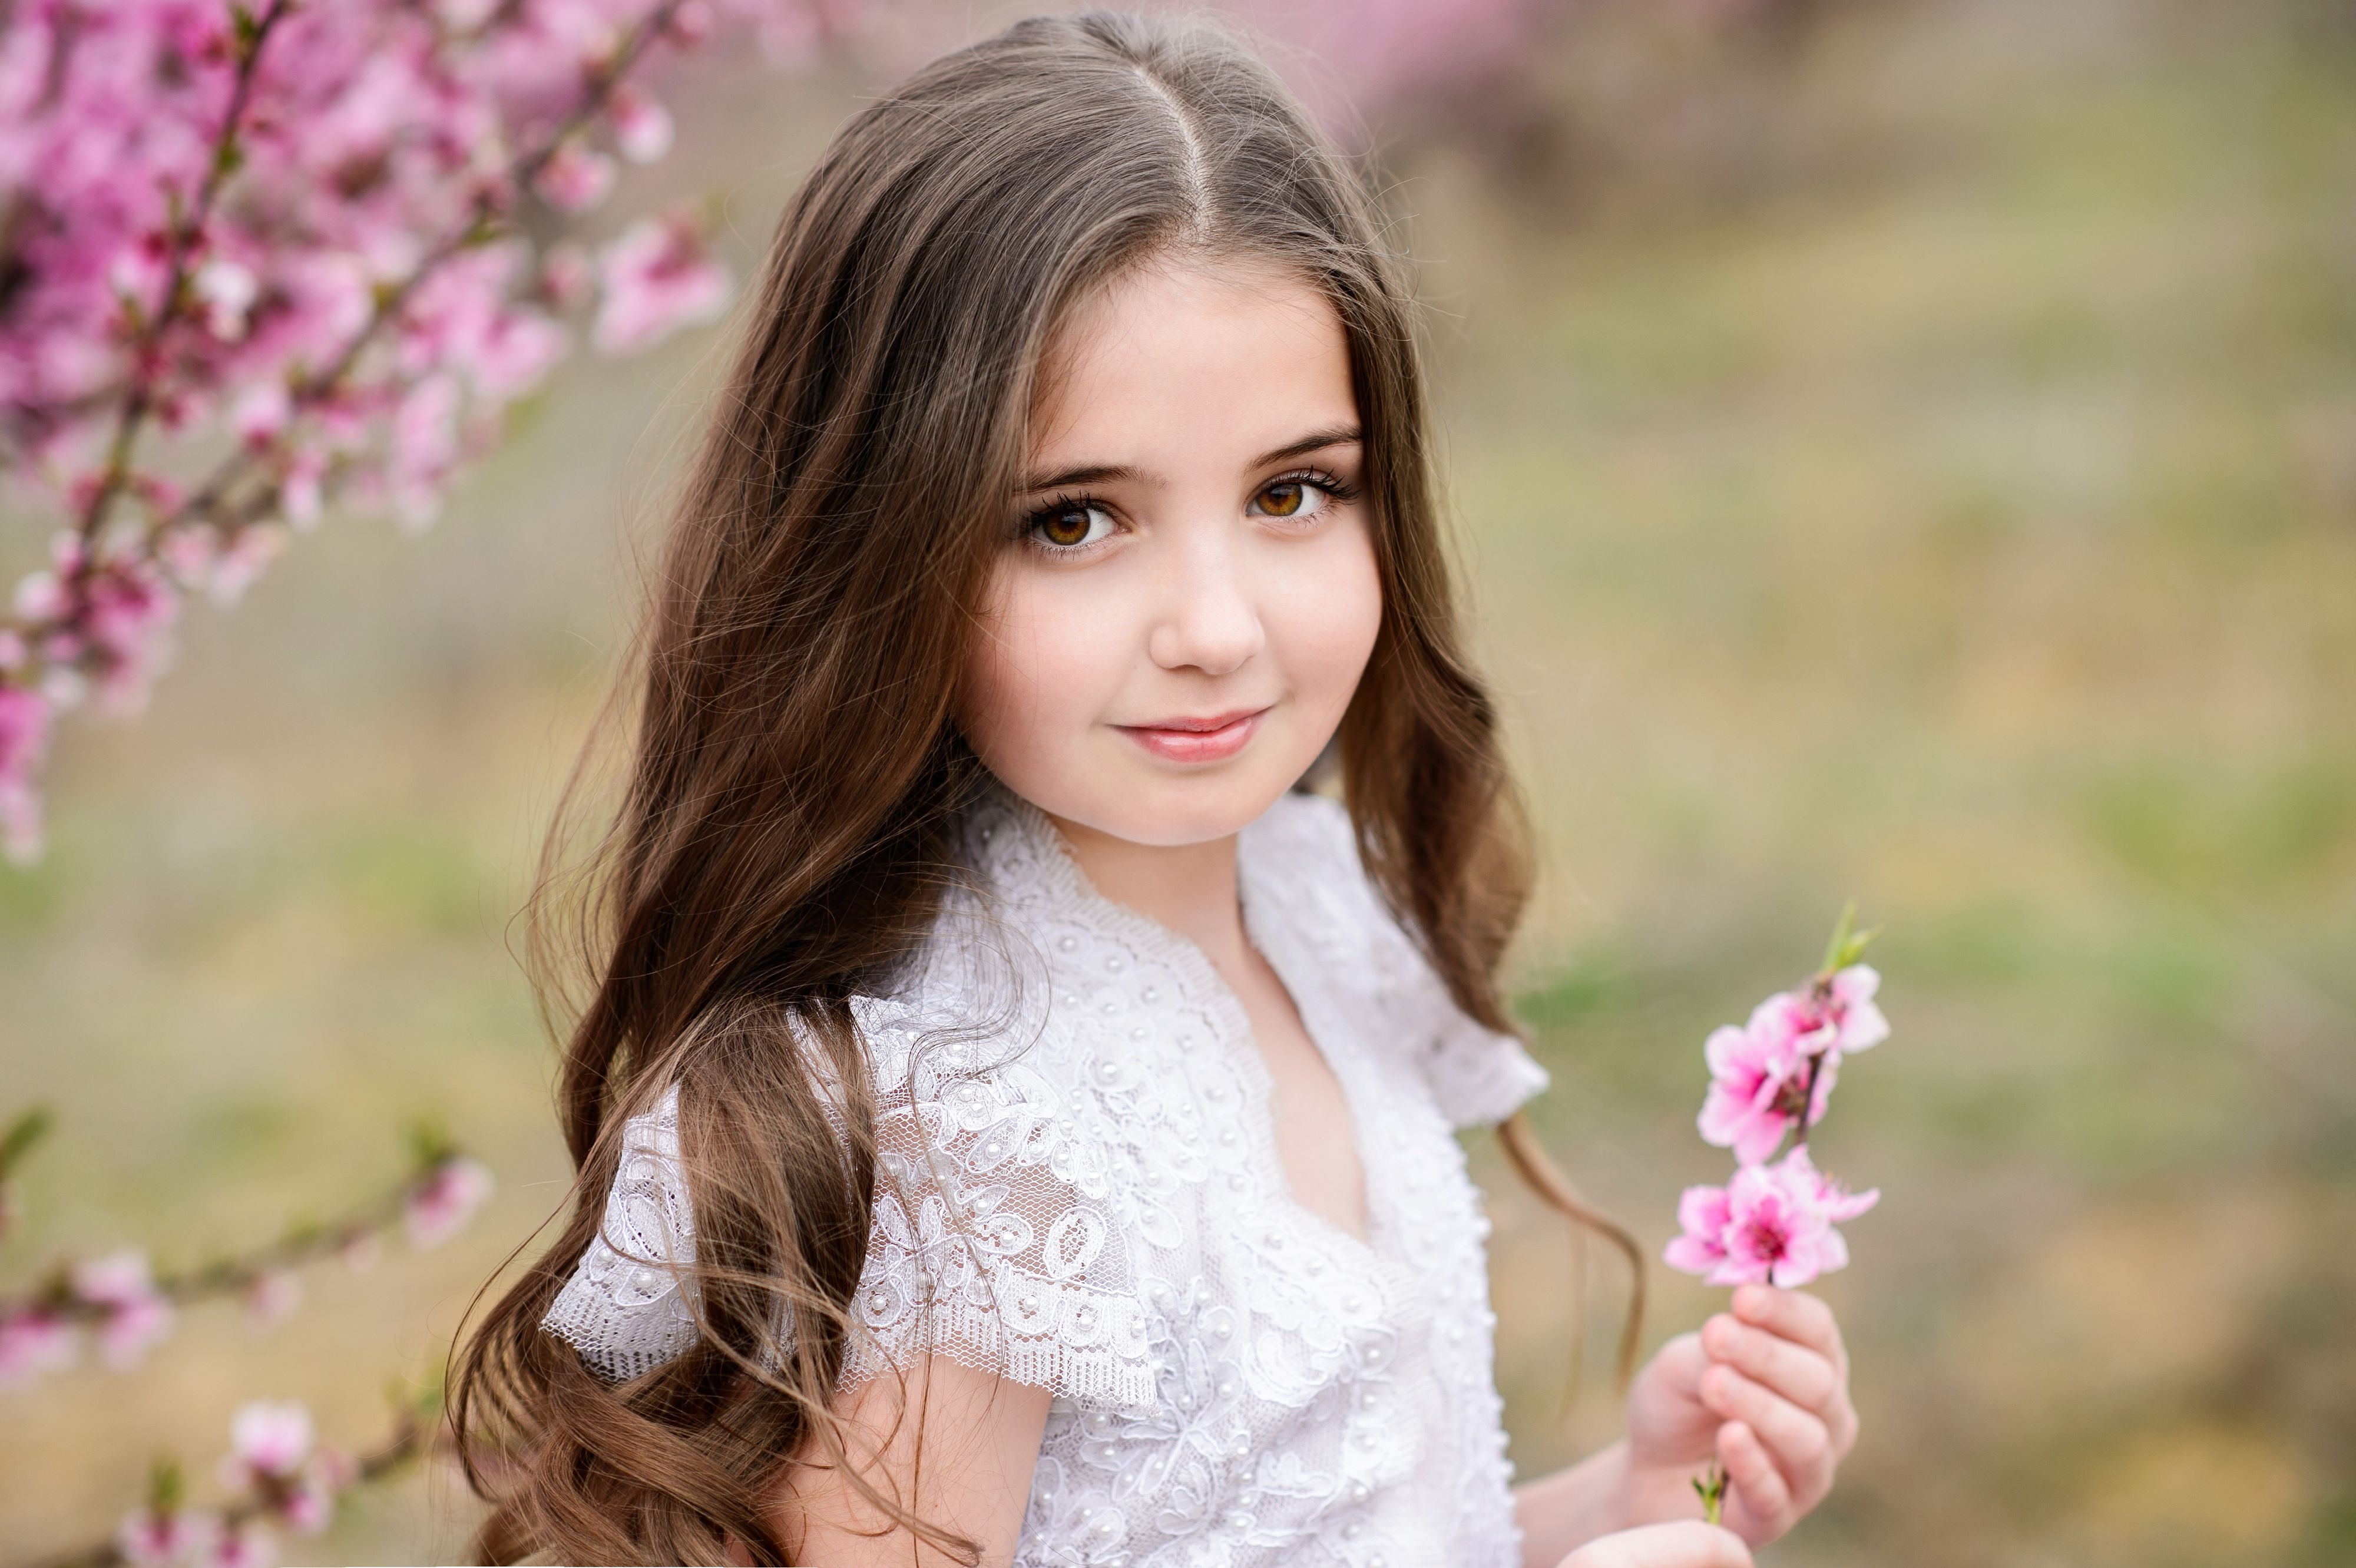 Little Cute Girl iPad Pro Retina Display HD 4k Wallpaper, Image, Background, Photo and Picture